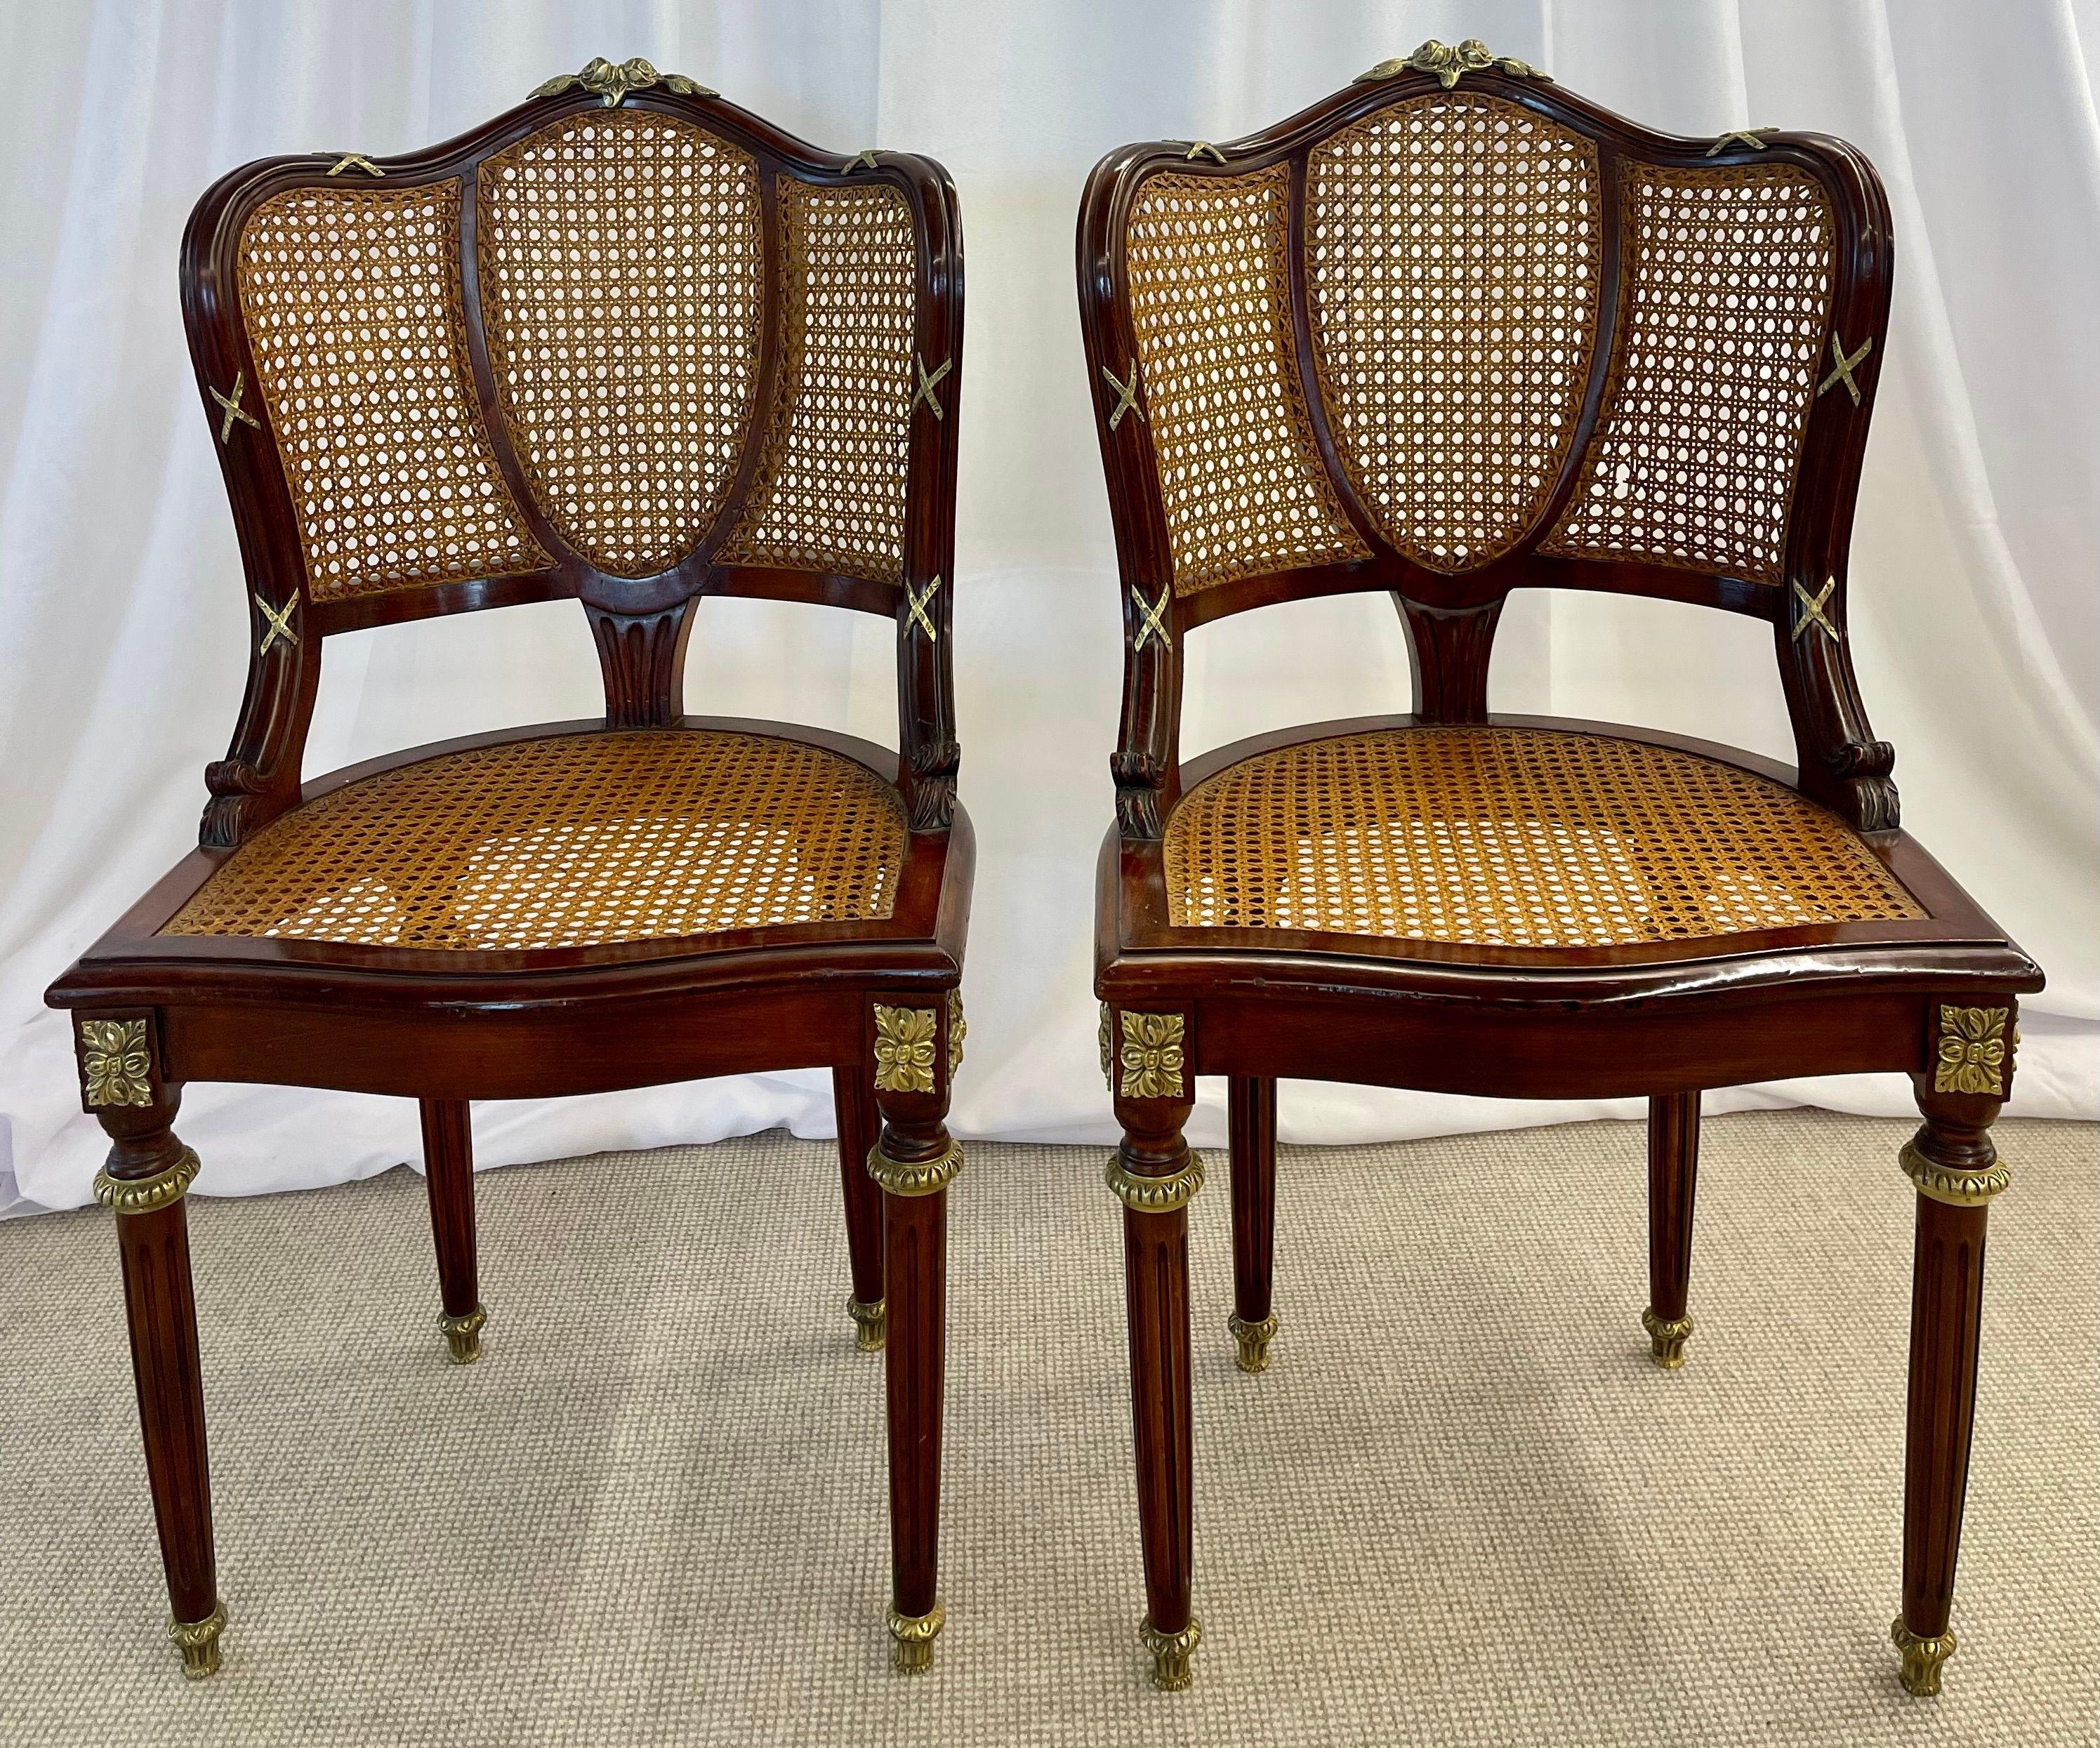 Early 20th Century Pair of Fine Bronze-Mounted Louis XVI Style Dining Chairs Manner of Jansen